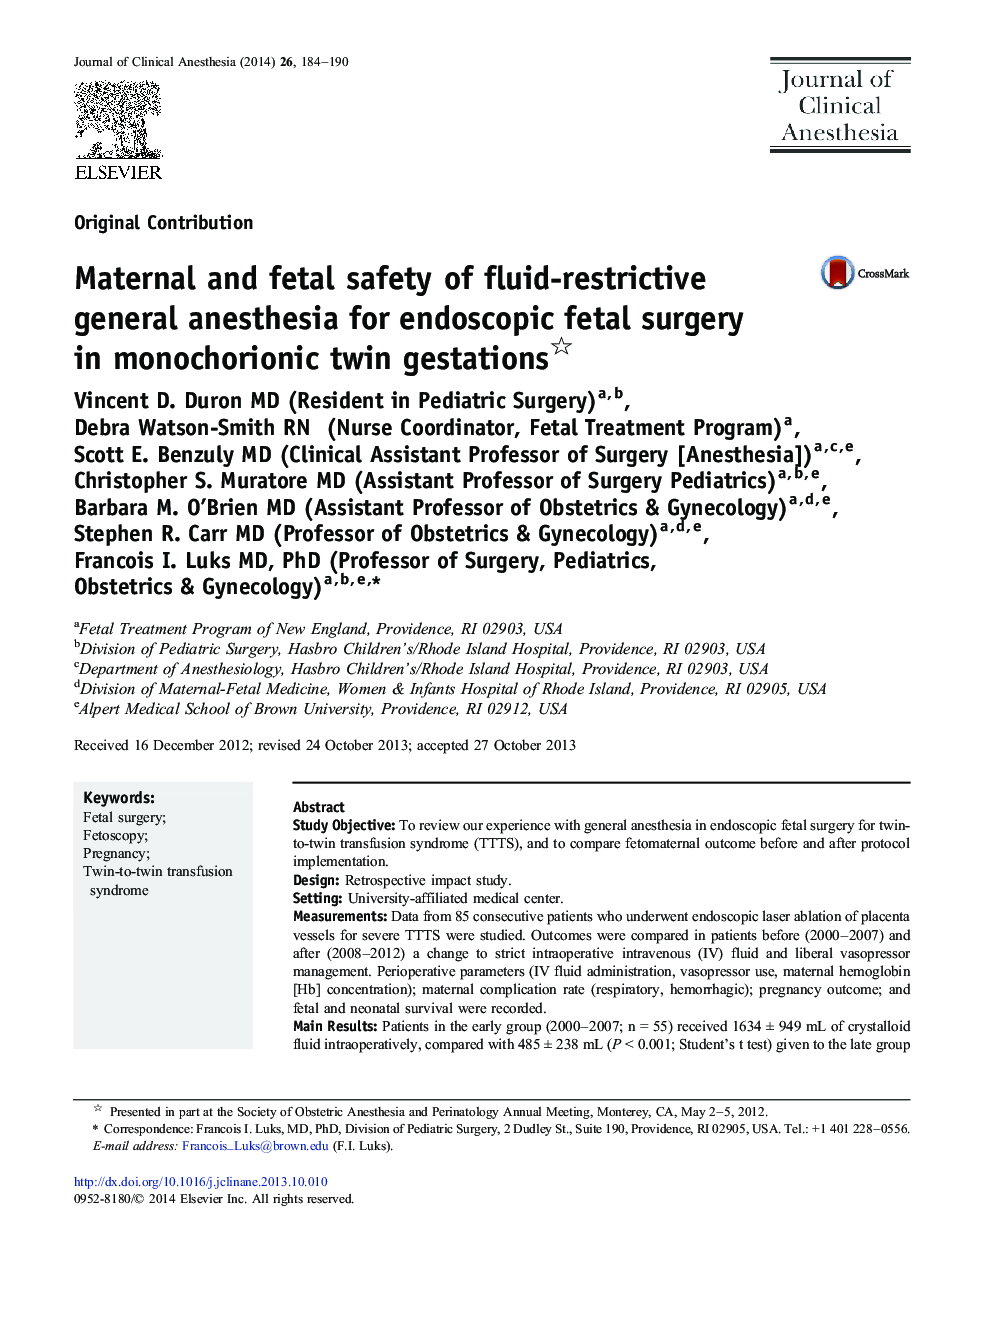 Maternal and fetal safety of fluid-restrictive general anesthesia for endoscopic fetal surgery in monochorionic twin gestations 